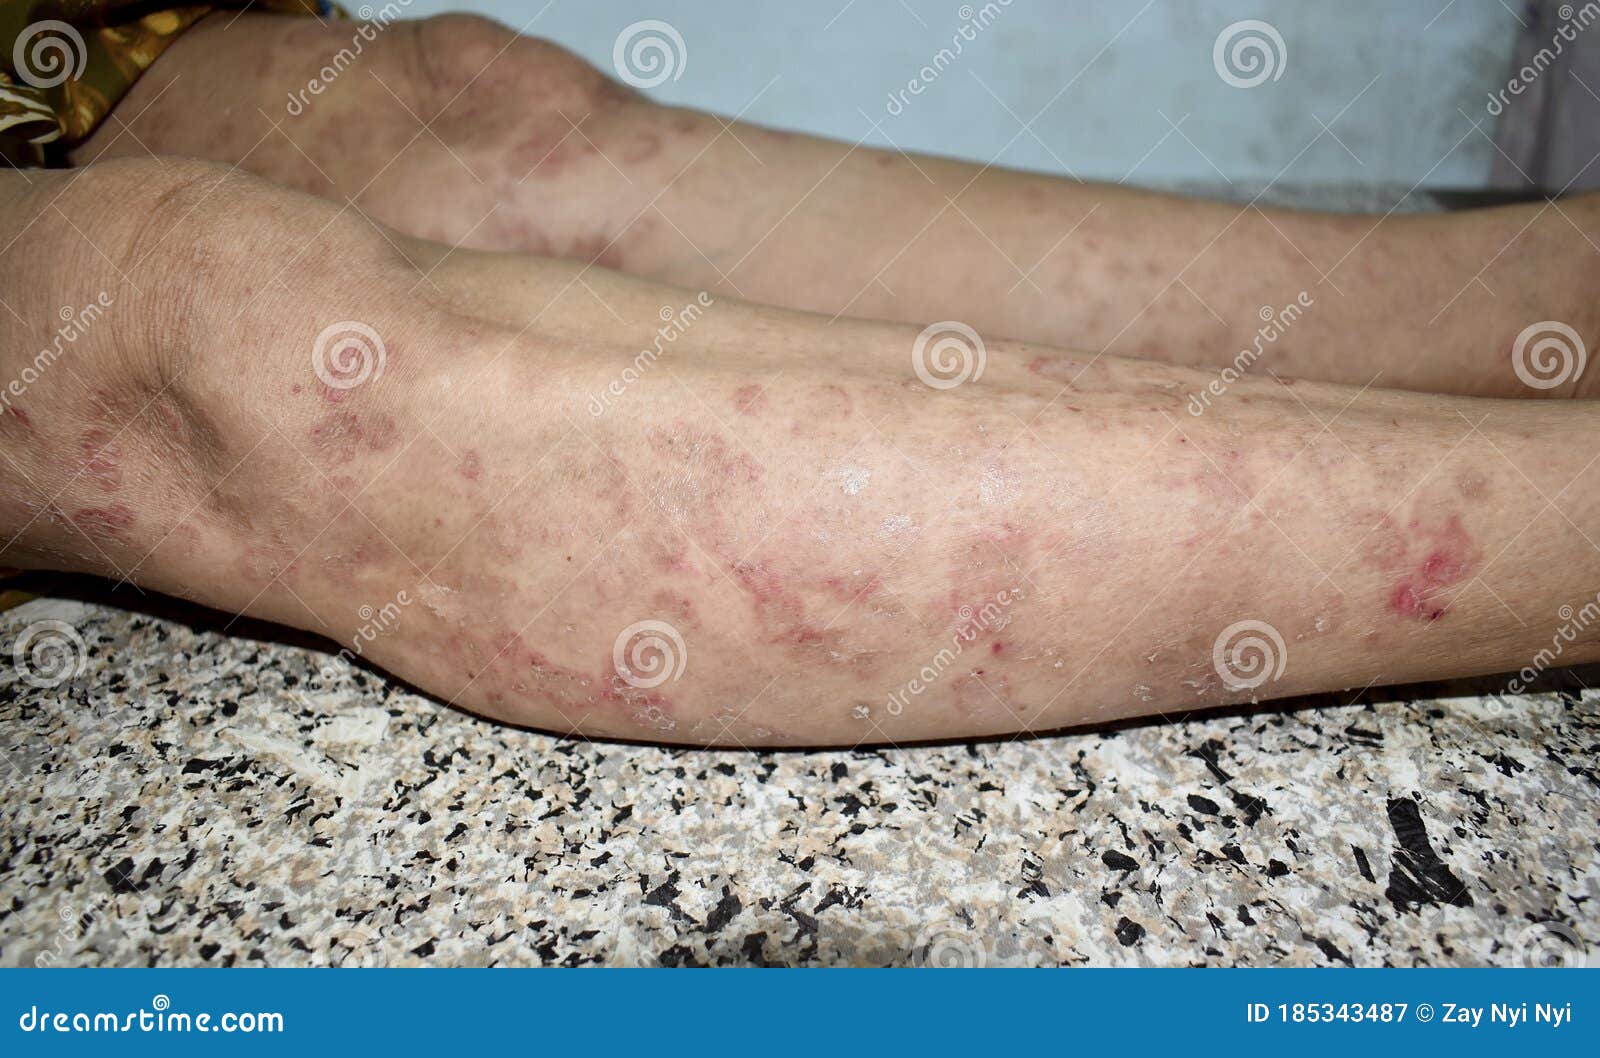 Psoriasis or Fungal Infection Called Tinea Corporis on Leg of